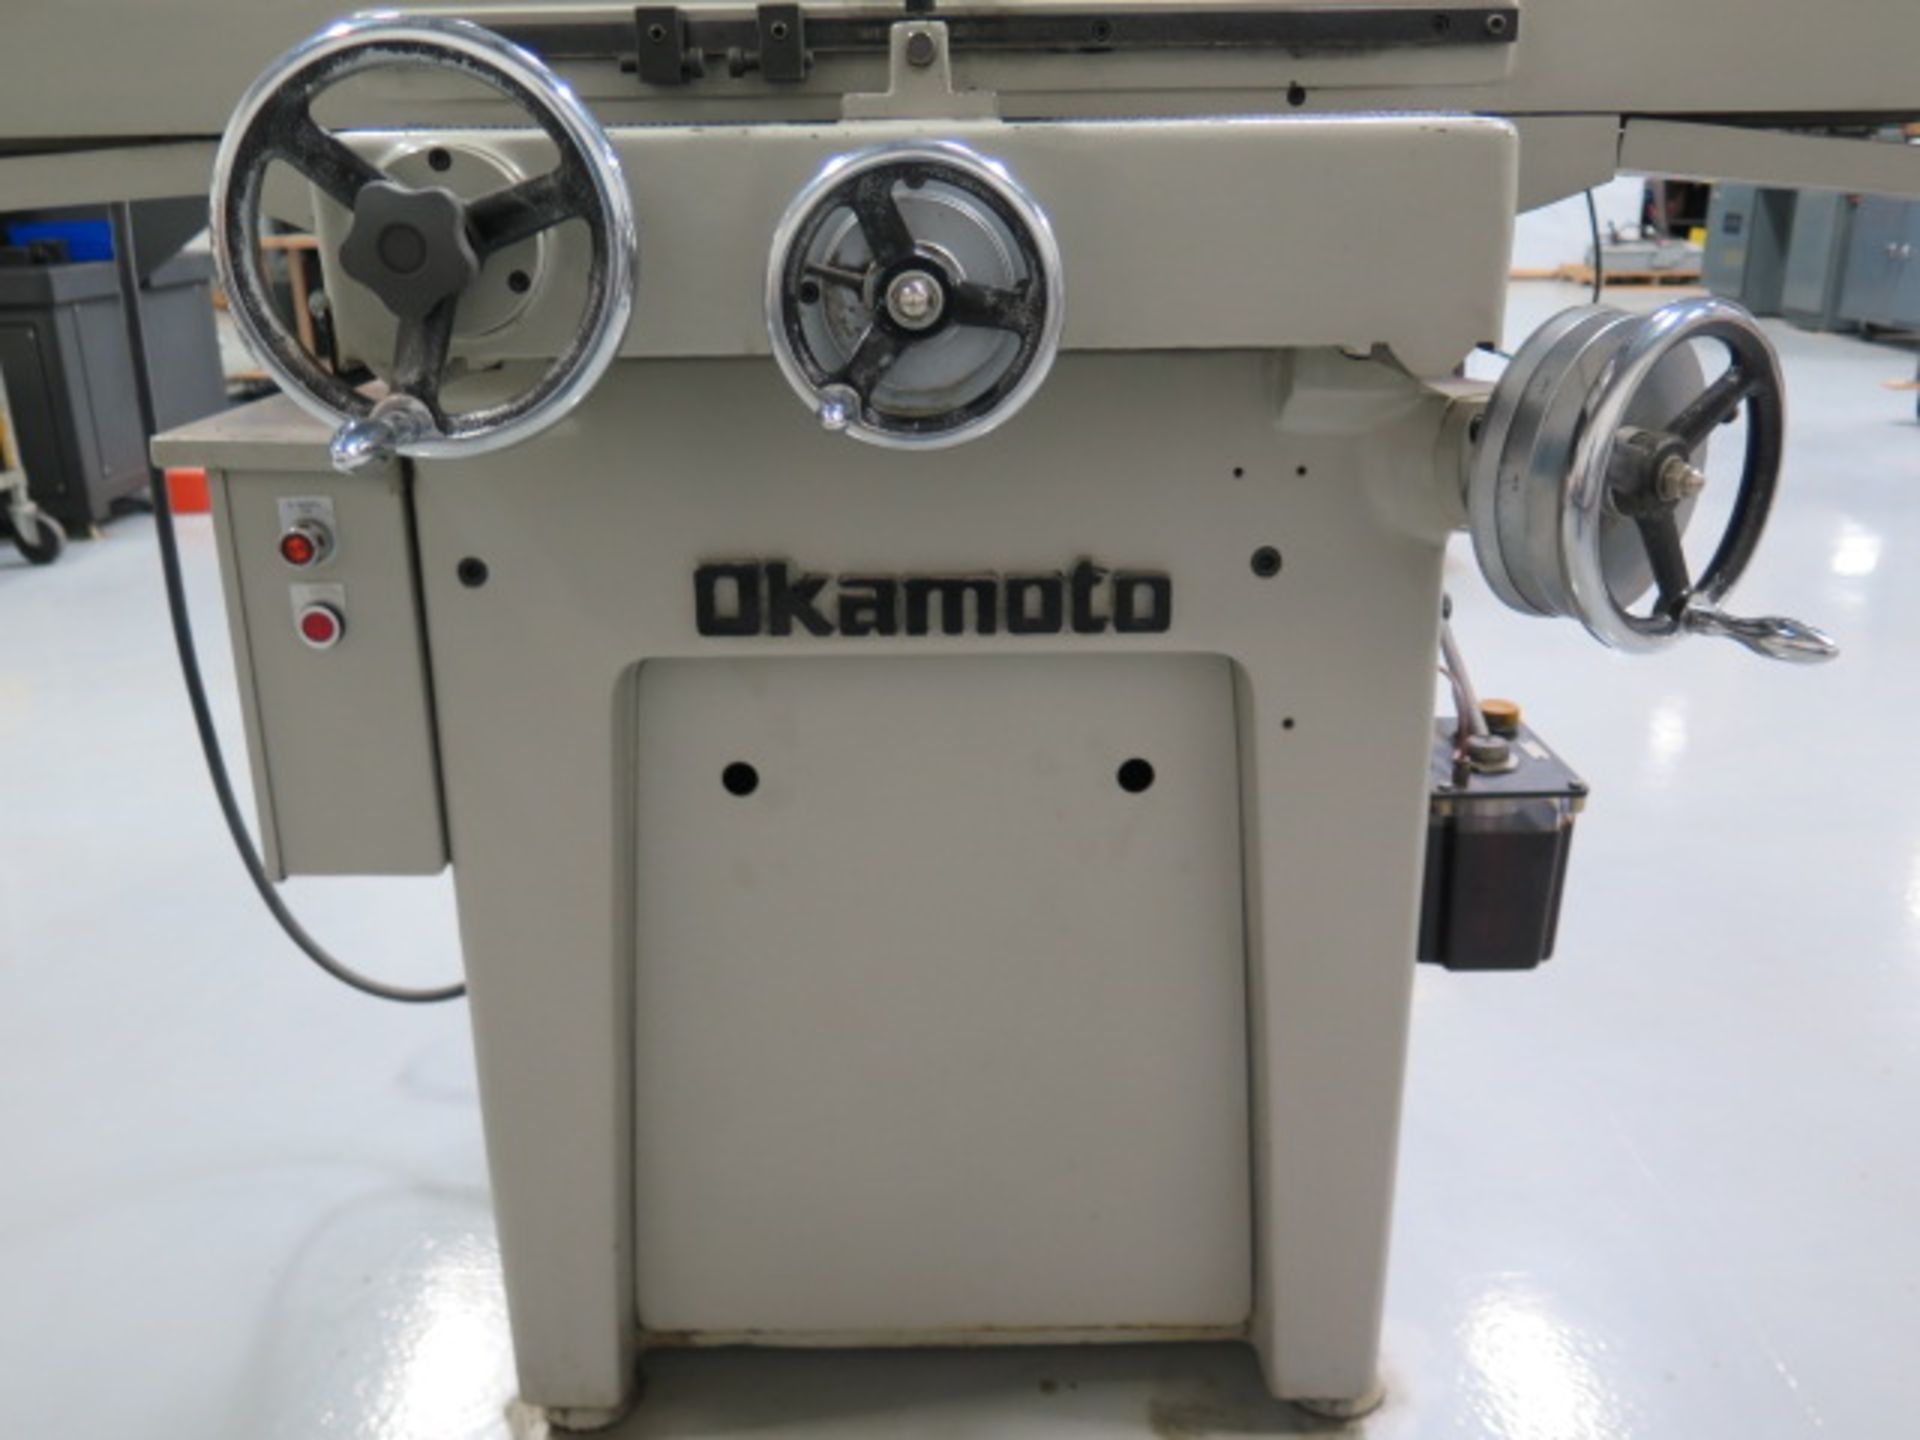 Okamoto “6-18 LINEAR” 6” x 18” Surface Grinder s/n 4469 w/ Mitutoyo UDR-220 Program DRO, SOLD AS IS - Image 6 of 15